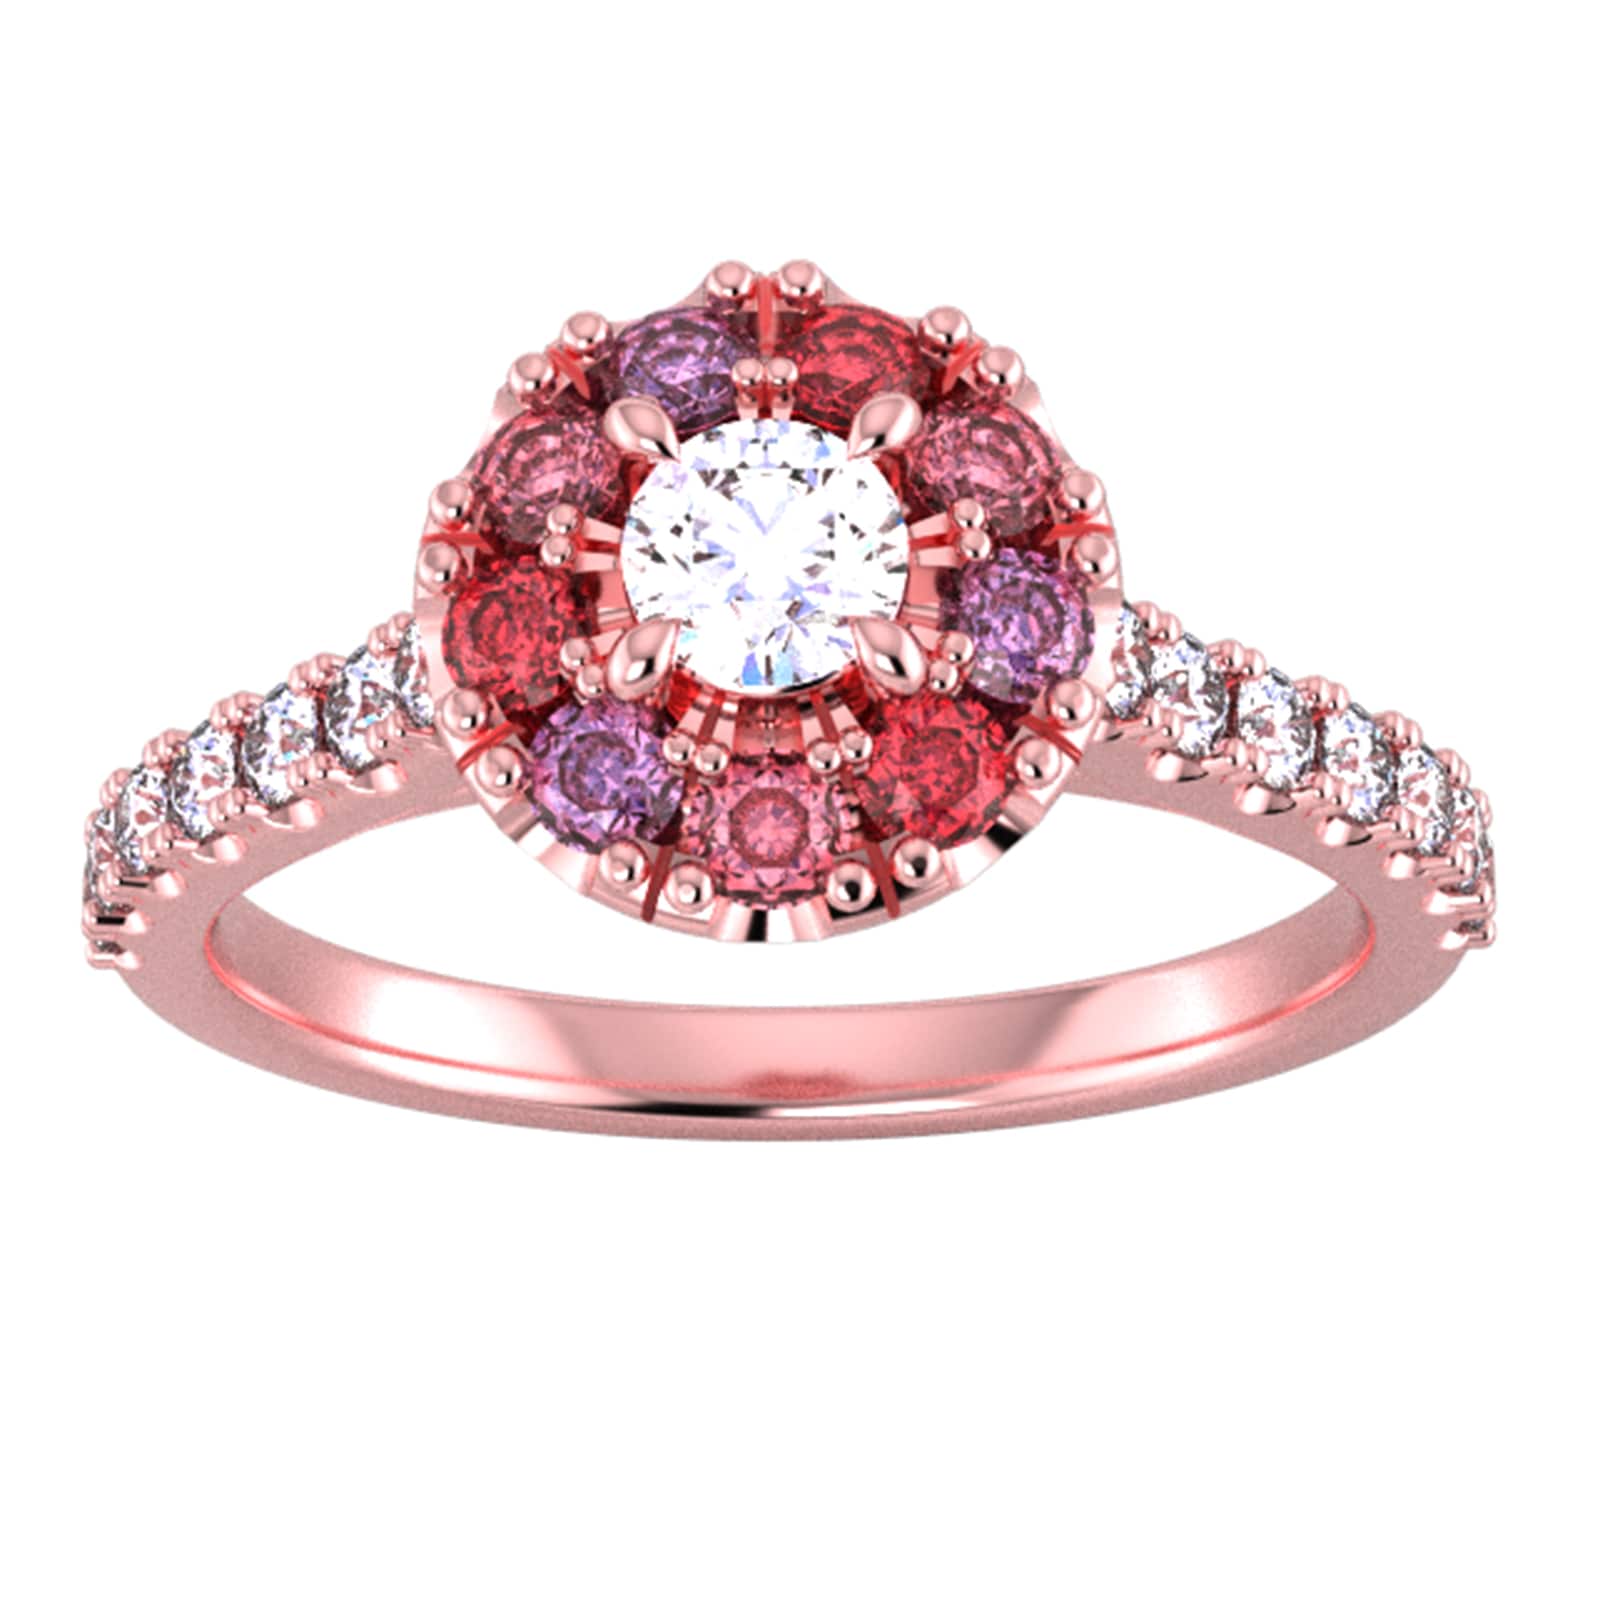 18ct Rose Gold Diamond & Red, Pink, Purple Sapphire Halo Ring - Ring Size J